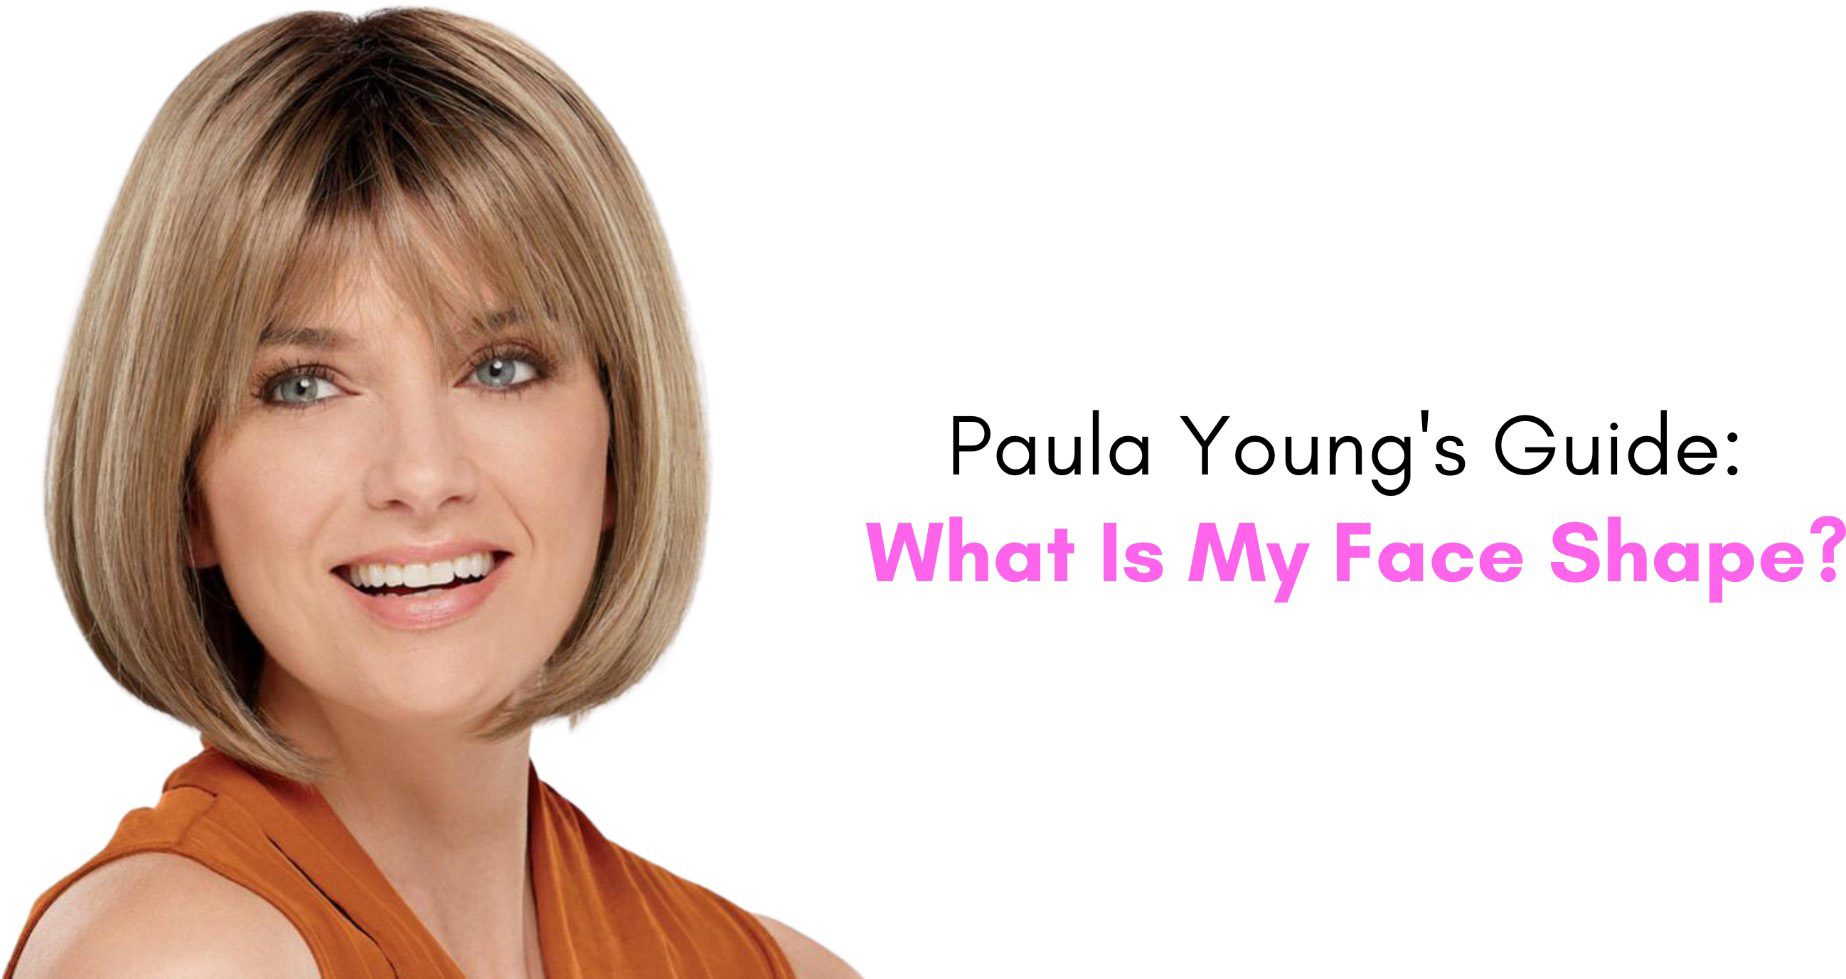 Paula Young’s Guide: What Is My Face Shape?